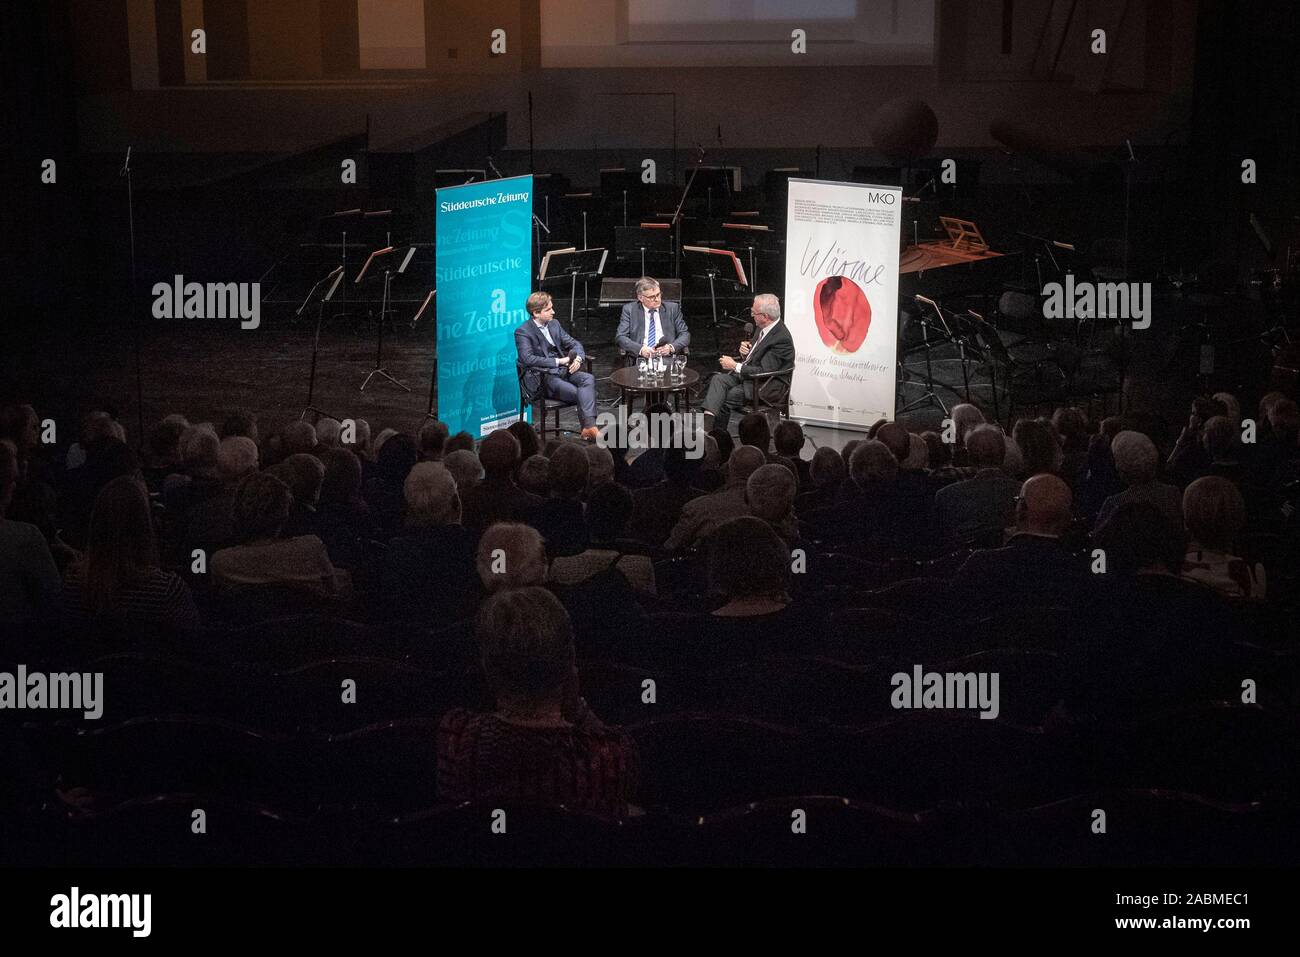 At the beginning of the series 'Wärme und Wallung' of the 'Süddeutsche Zeitung' and the Munich Chamber Orchestra, Clemens Schuldt, Stefan Kornelius and Theo Waigel discuss Germany 30 years after reunification at the Prinzregententheater in Munich. [automated translation] Stock Photo